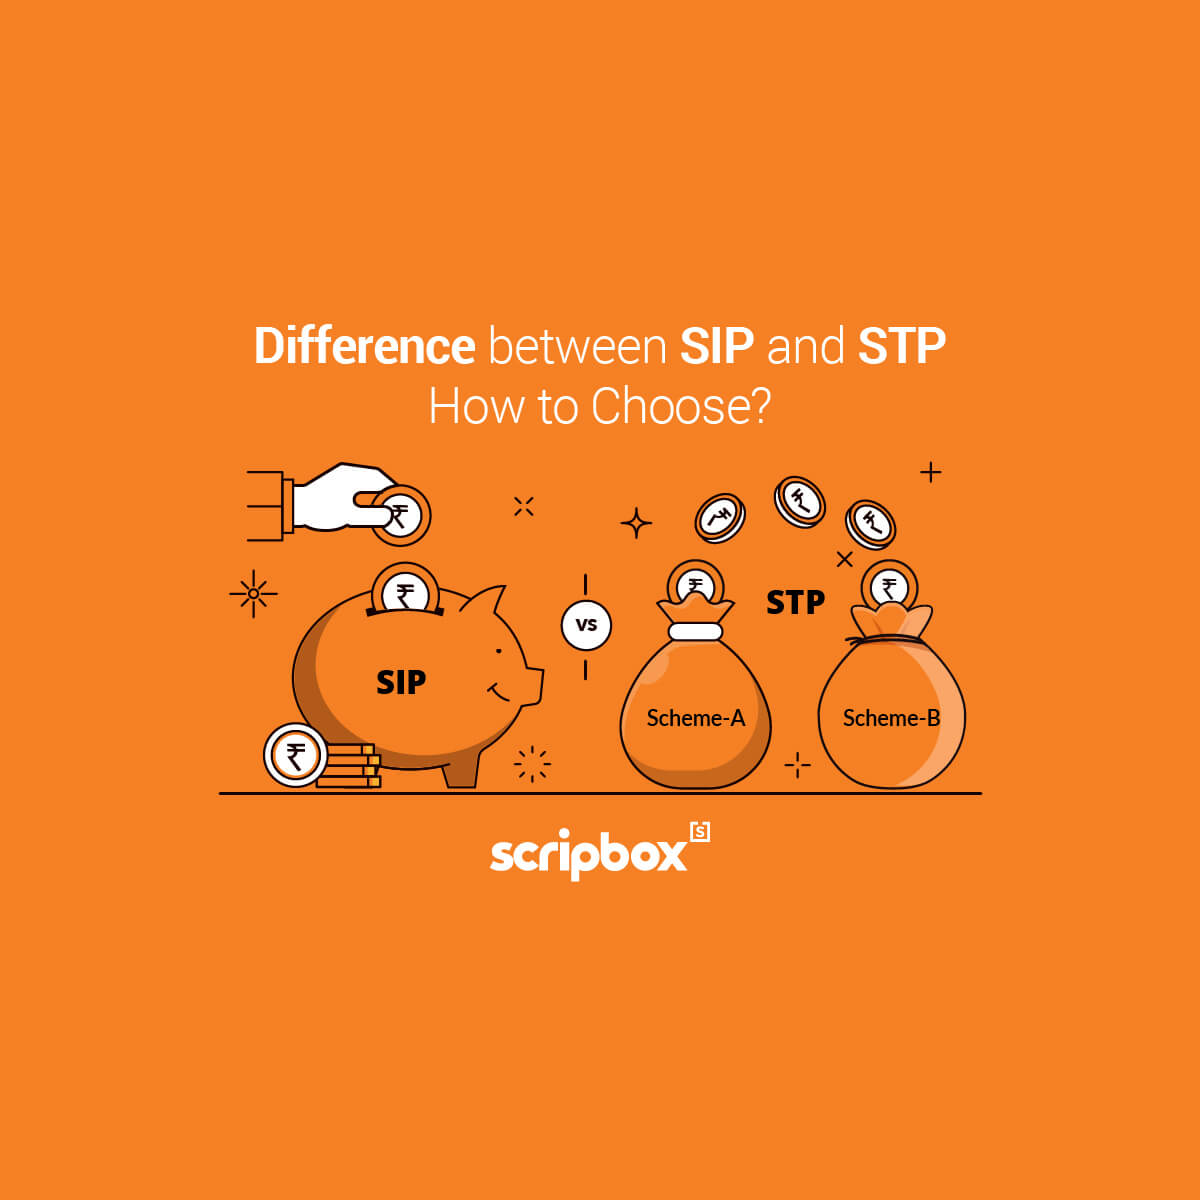 difference-between-sip-and-stp